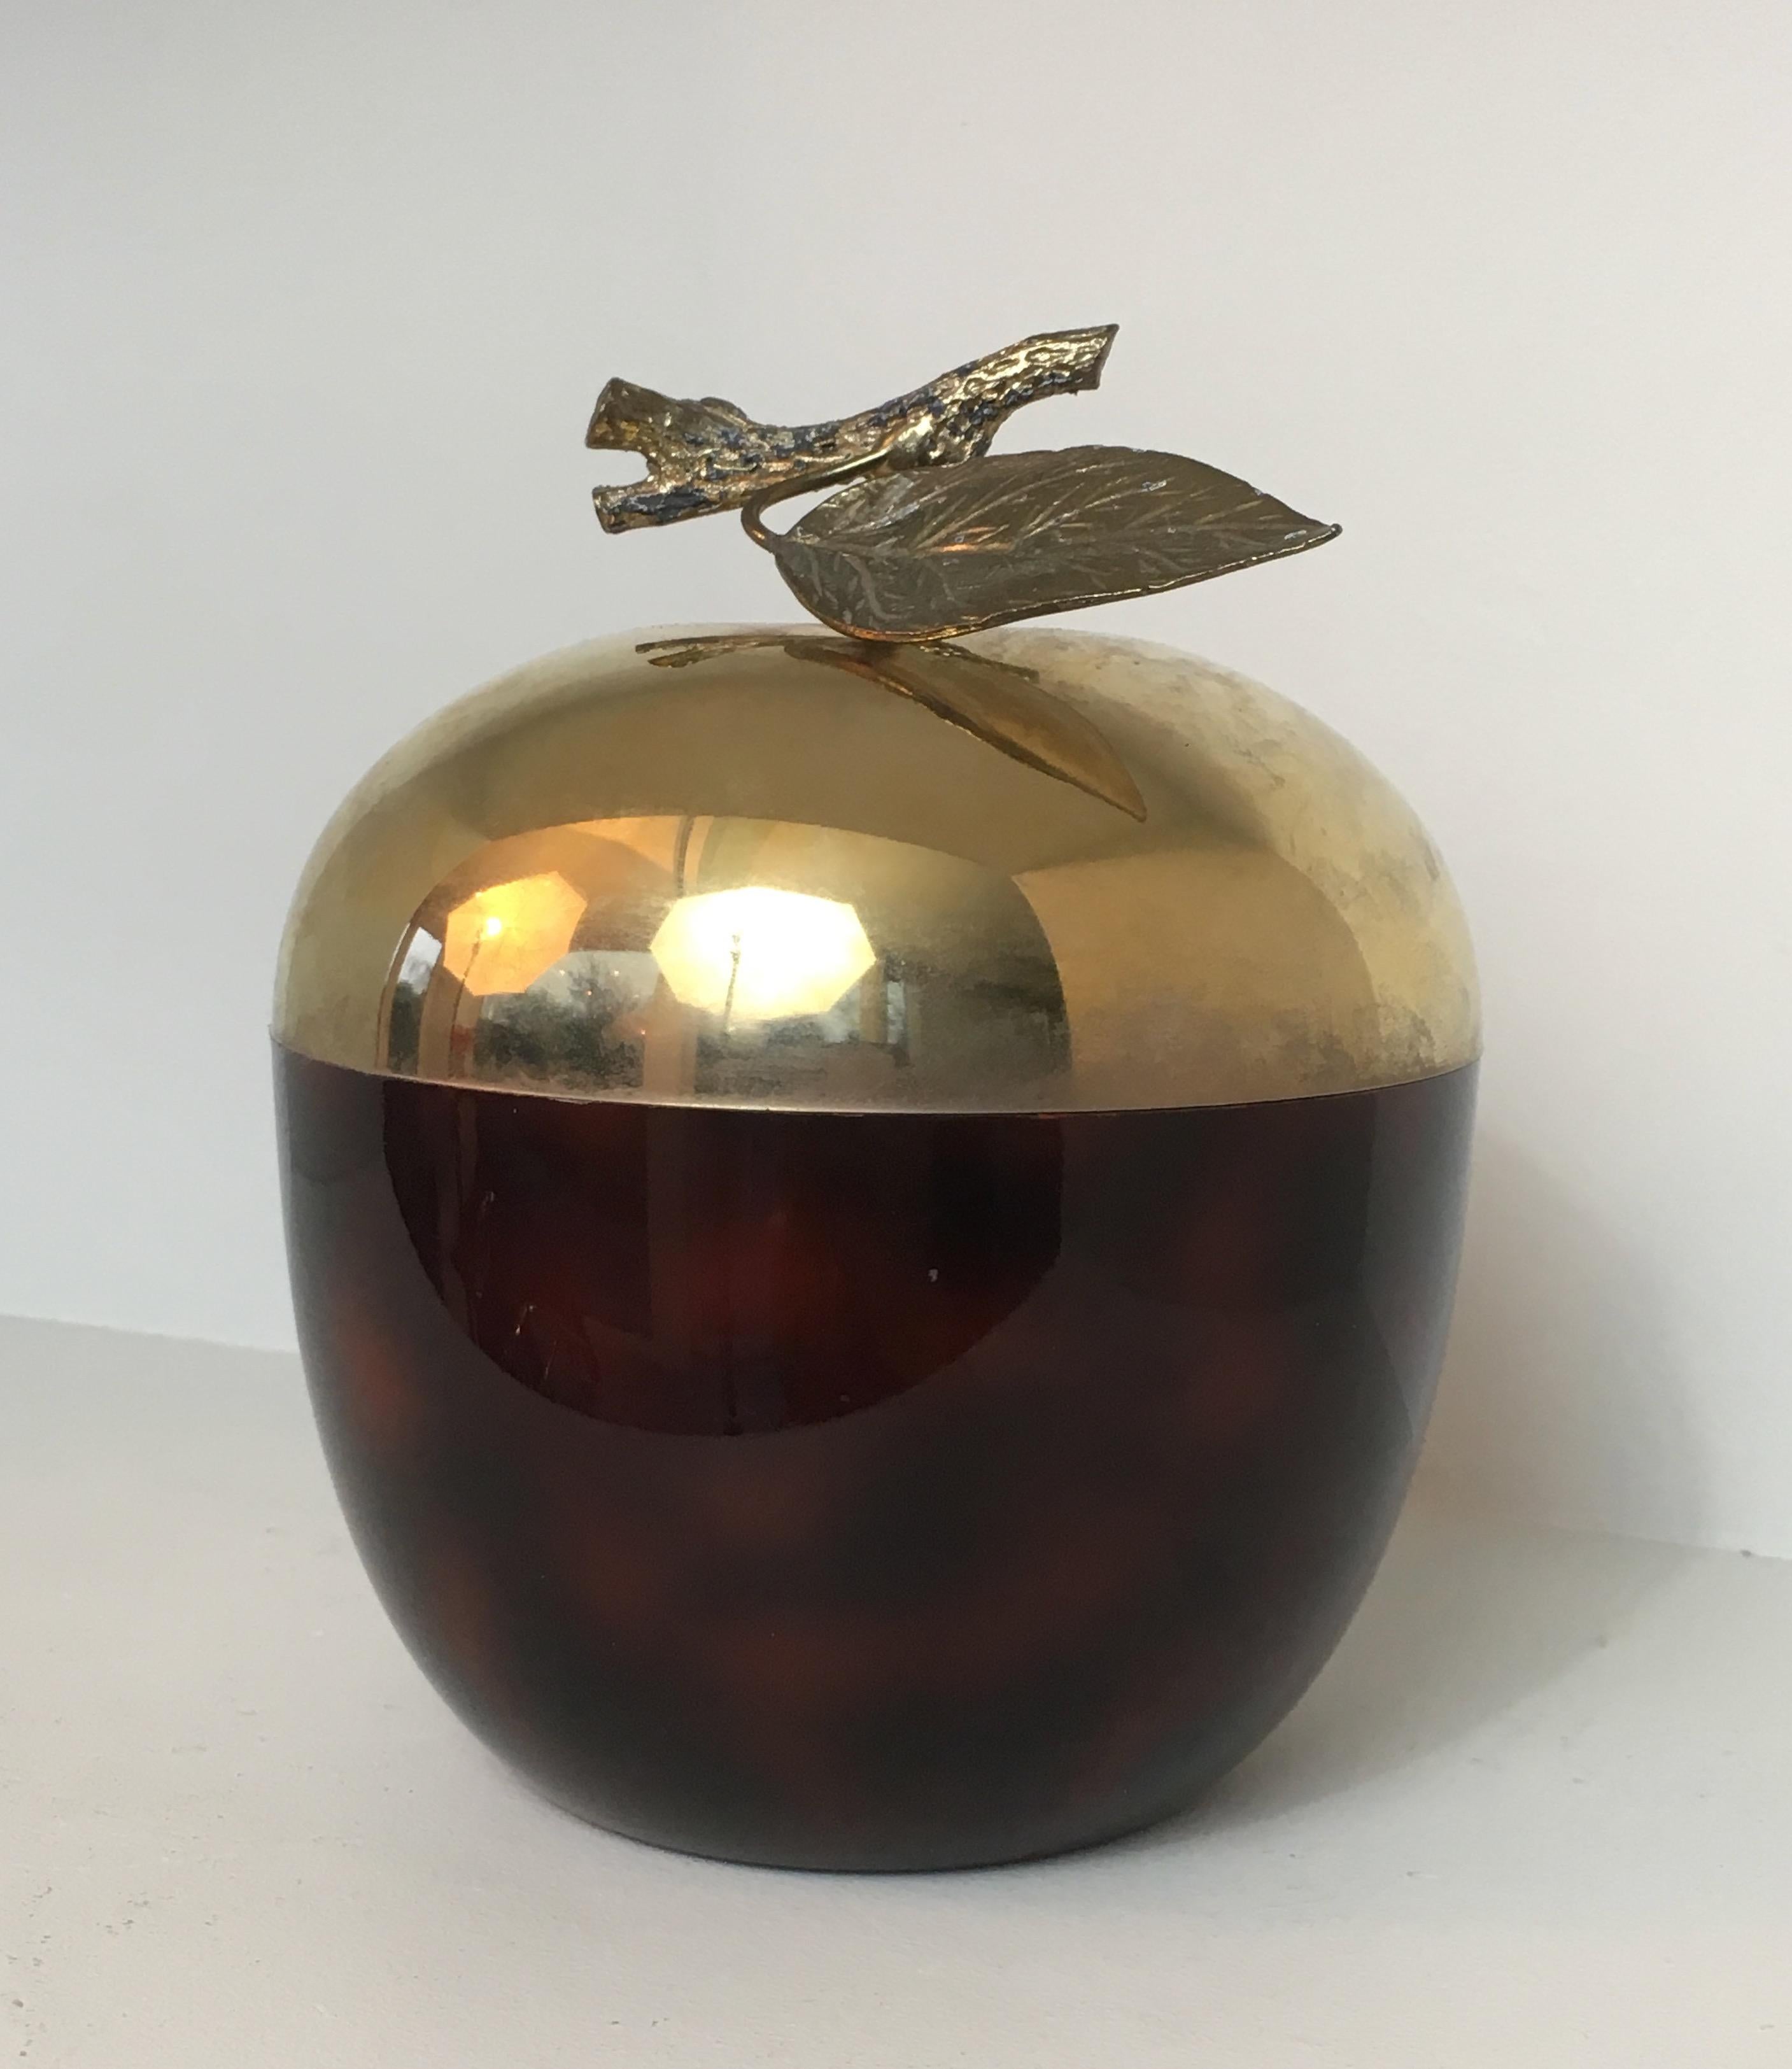 This unusual apple ice bucket is made of red Lucite, gilt metal and plastic. This is a French work, circa 1970.